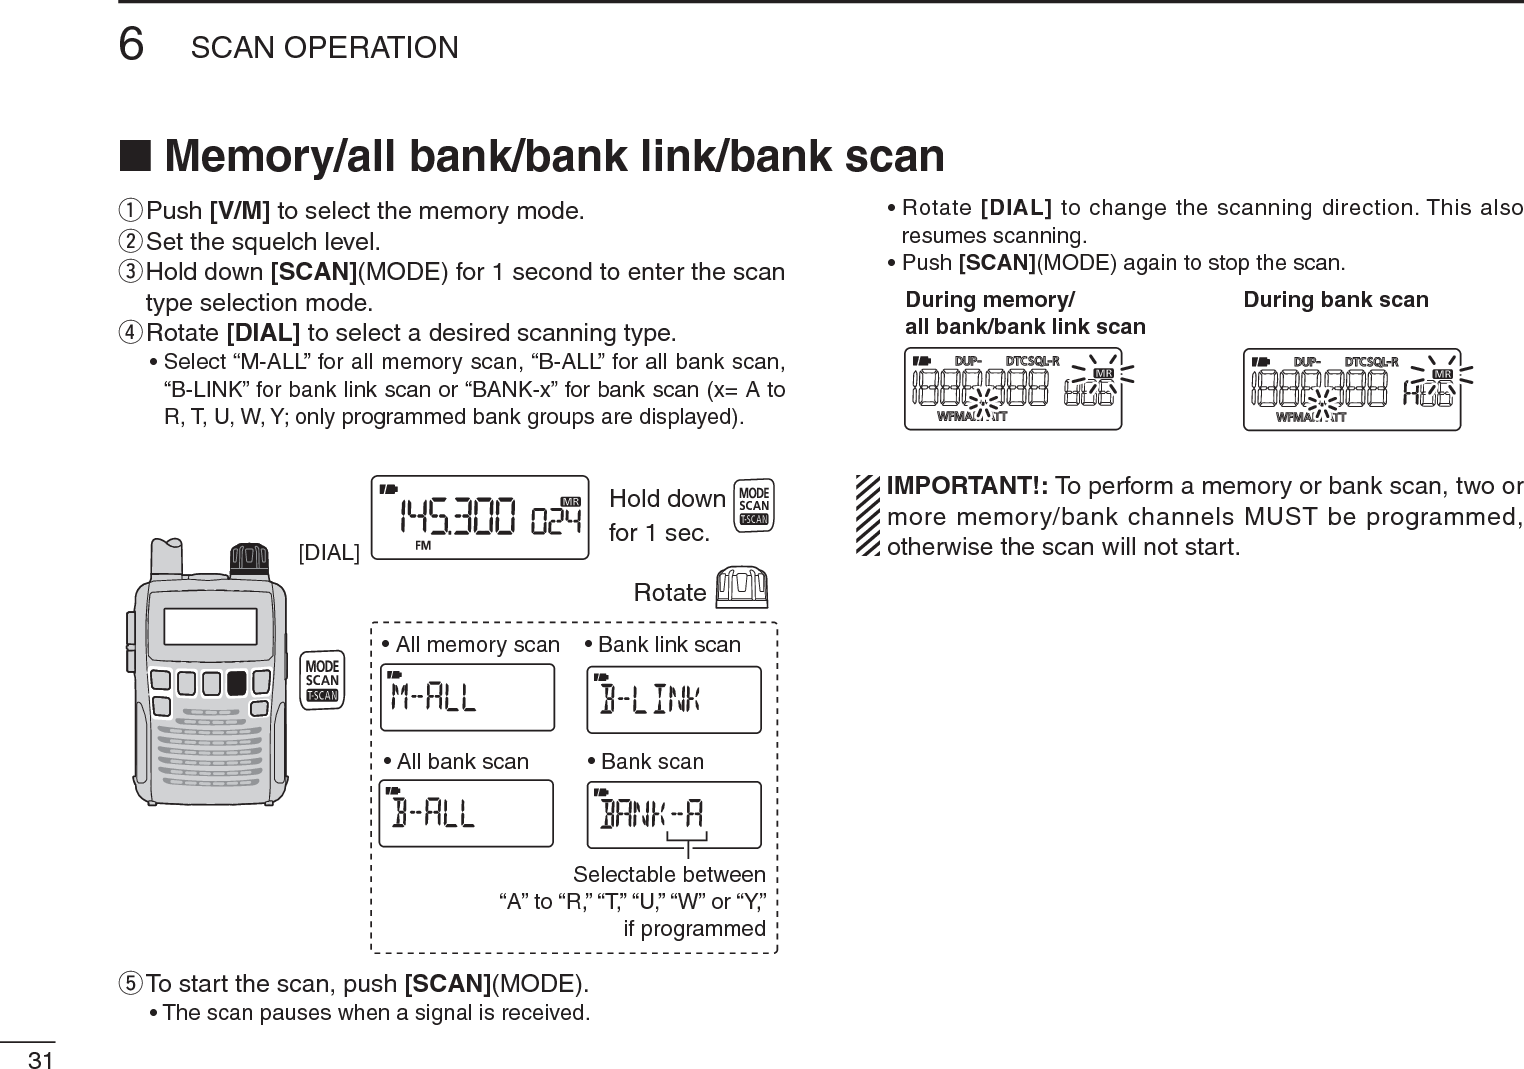 316SCAN OPERATIONN Memory/all bank/bank link/bank scanqPush [V/M] to select the memory mode.wSet the squelch level.e  Hold down [SCAN](MODE) for 1 second to enter the scan type selection mode.rRotate [DIAL] to select a desired scanning type.• Select “M-ALL” for all memory scan, “B-ALL” for all bank scan, “B-LINK” for bank link scan or “BANK-x” for bank scan (x= A to R, T, U, W, Y; only programmed bank groups are displayed).[DIAL]• All memory scan• All bank scan• Bank link scan• Bank scanSelectable between“A” to “R,” “T,” “U,” “W” or “Y,”if programmedRotateHold downfor 1 sec.tTo start the scan, push [SCAN](MODE).• The scan pauses when a signal is received.• Rotate [DIAL] to change the scanning direction. This also resumes scanning.• Push [SCAN](MODE) again to stop the scan.During memory/all bank/bank link scanDuring bank scanIMPORTANT!: To perform a memory or bank scan, two or more memory/bank channels MUST be programmed, otherwise the scan will not start.